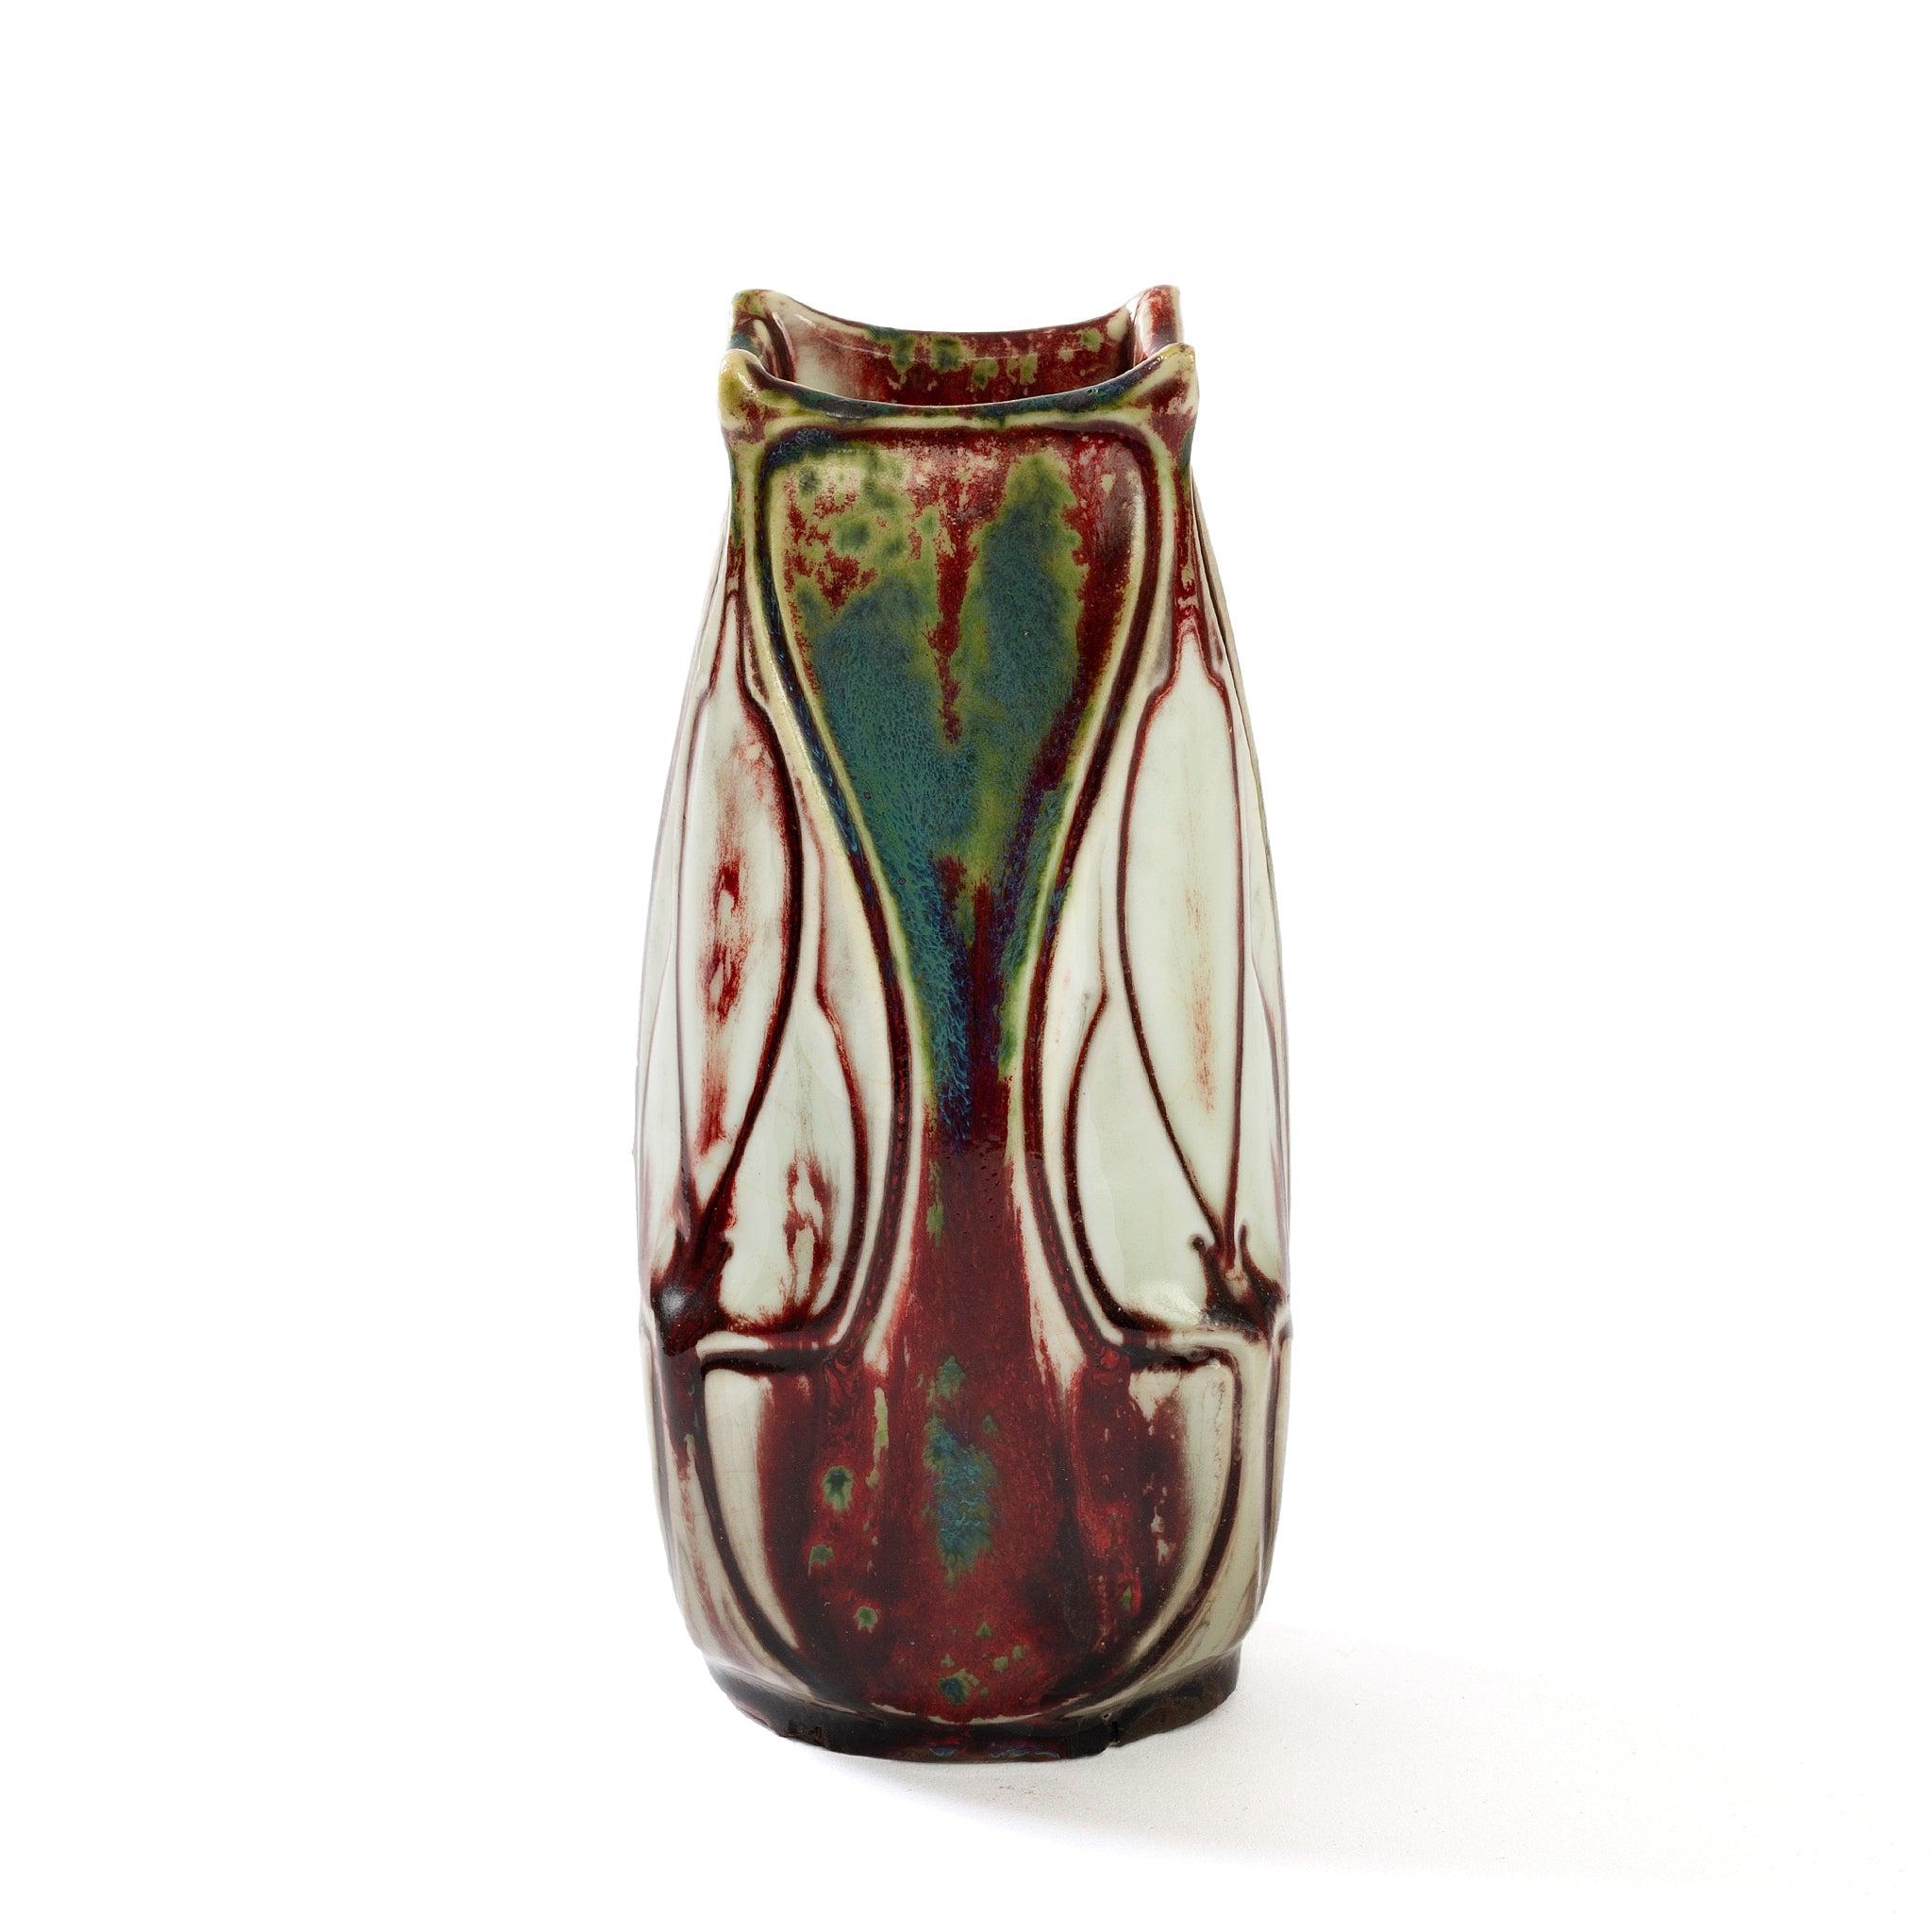 Pierre-Adrien Dalpayrat's signature ruby-cranberry-crimson glaze is at the forefront of this exciting composition, an arresting design featuring strong color contrast, irregular borders and sweeping lines. The vase is speckled throughout with teal